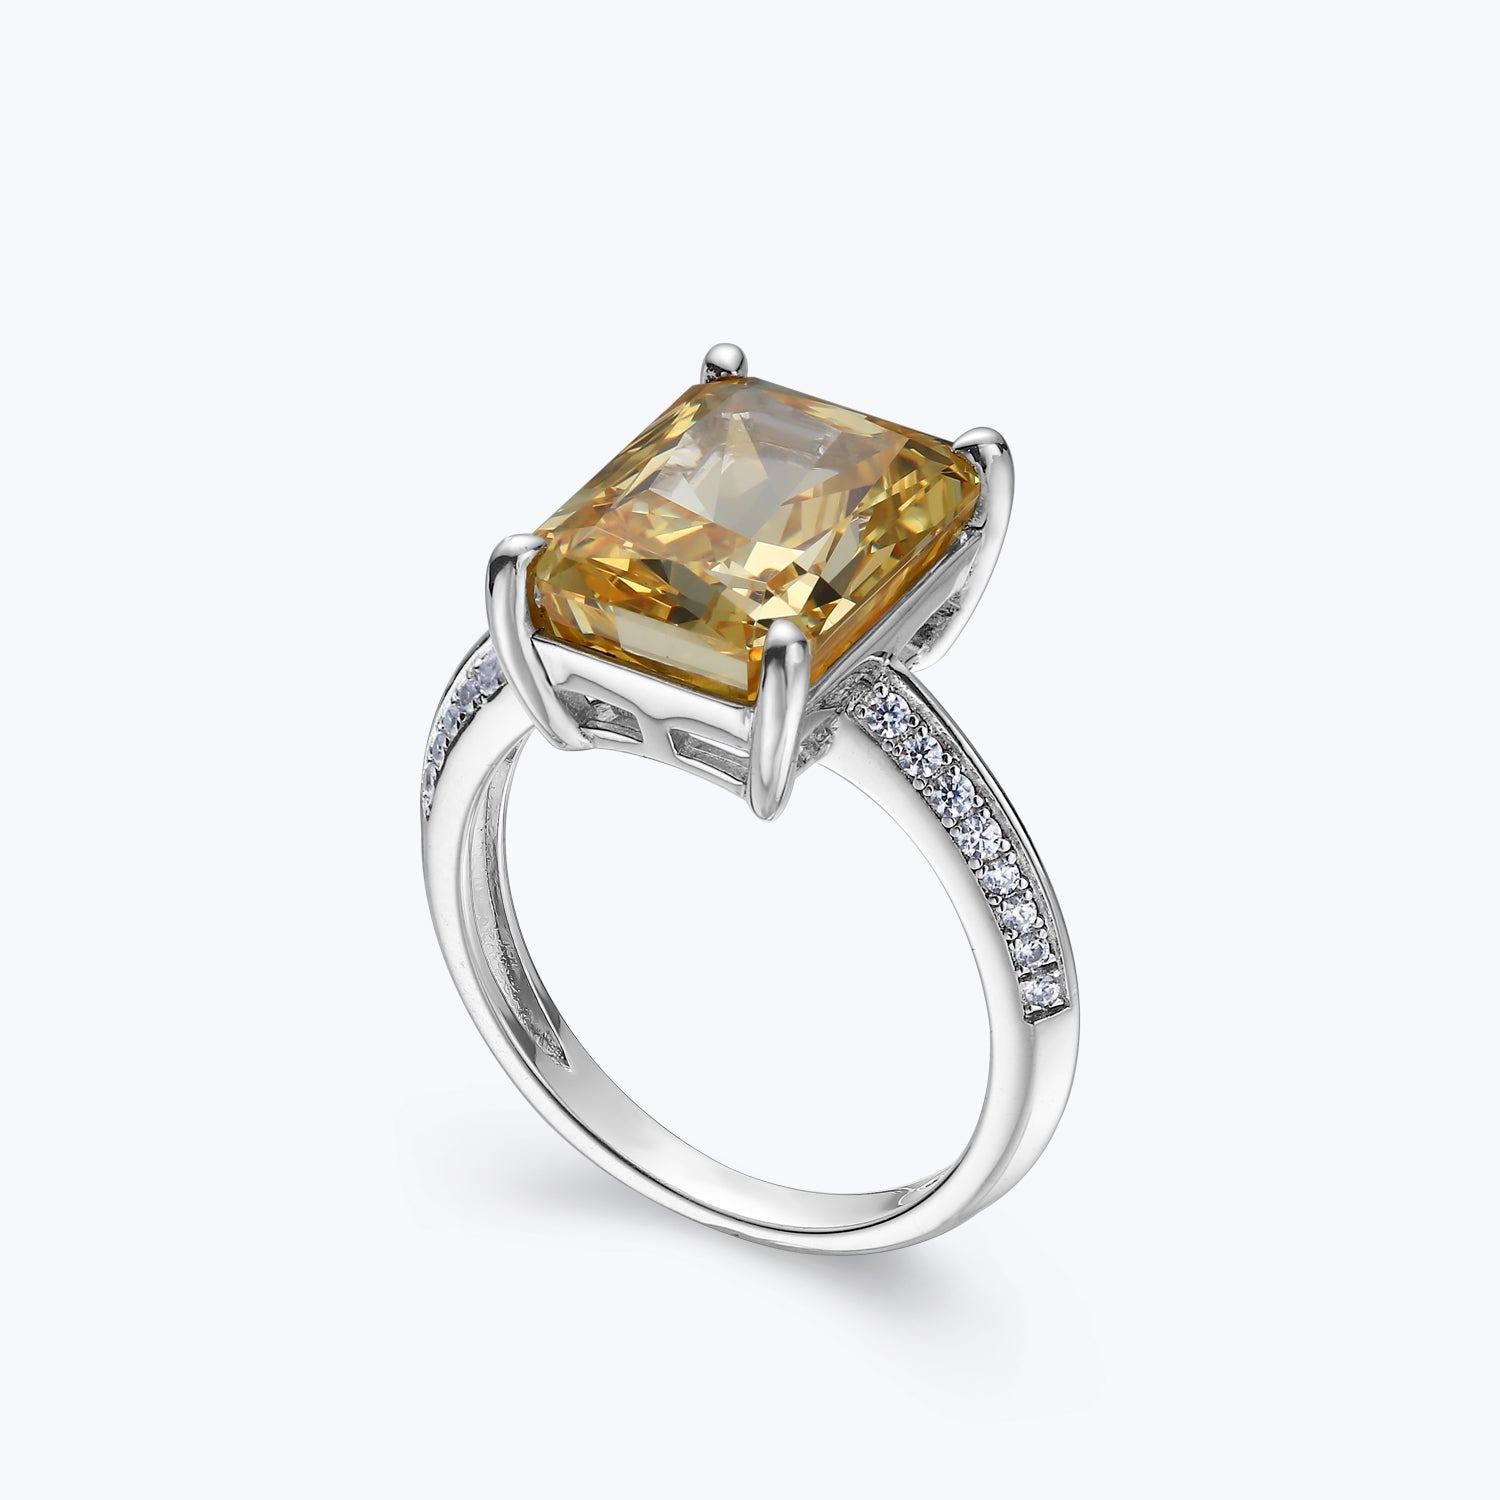 Citrine Yellow Emerald Cut Sterling Silver Ring - dissoojewelry